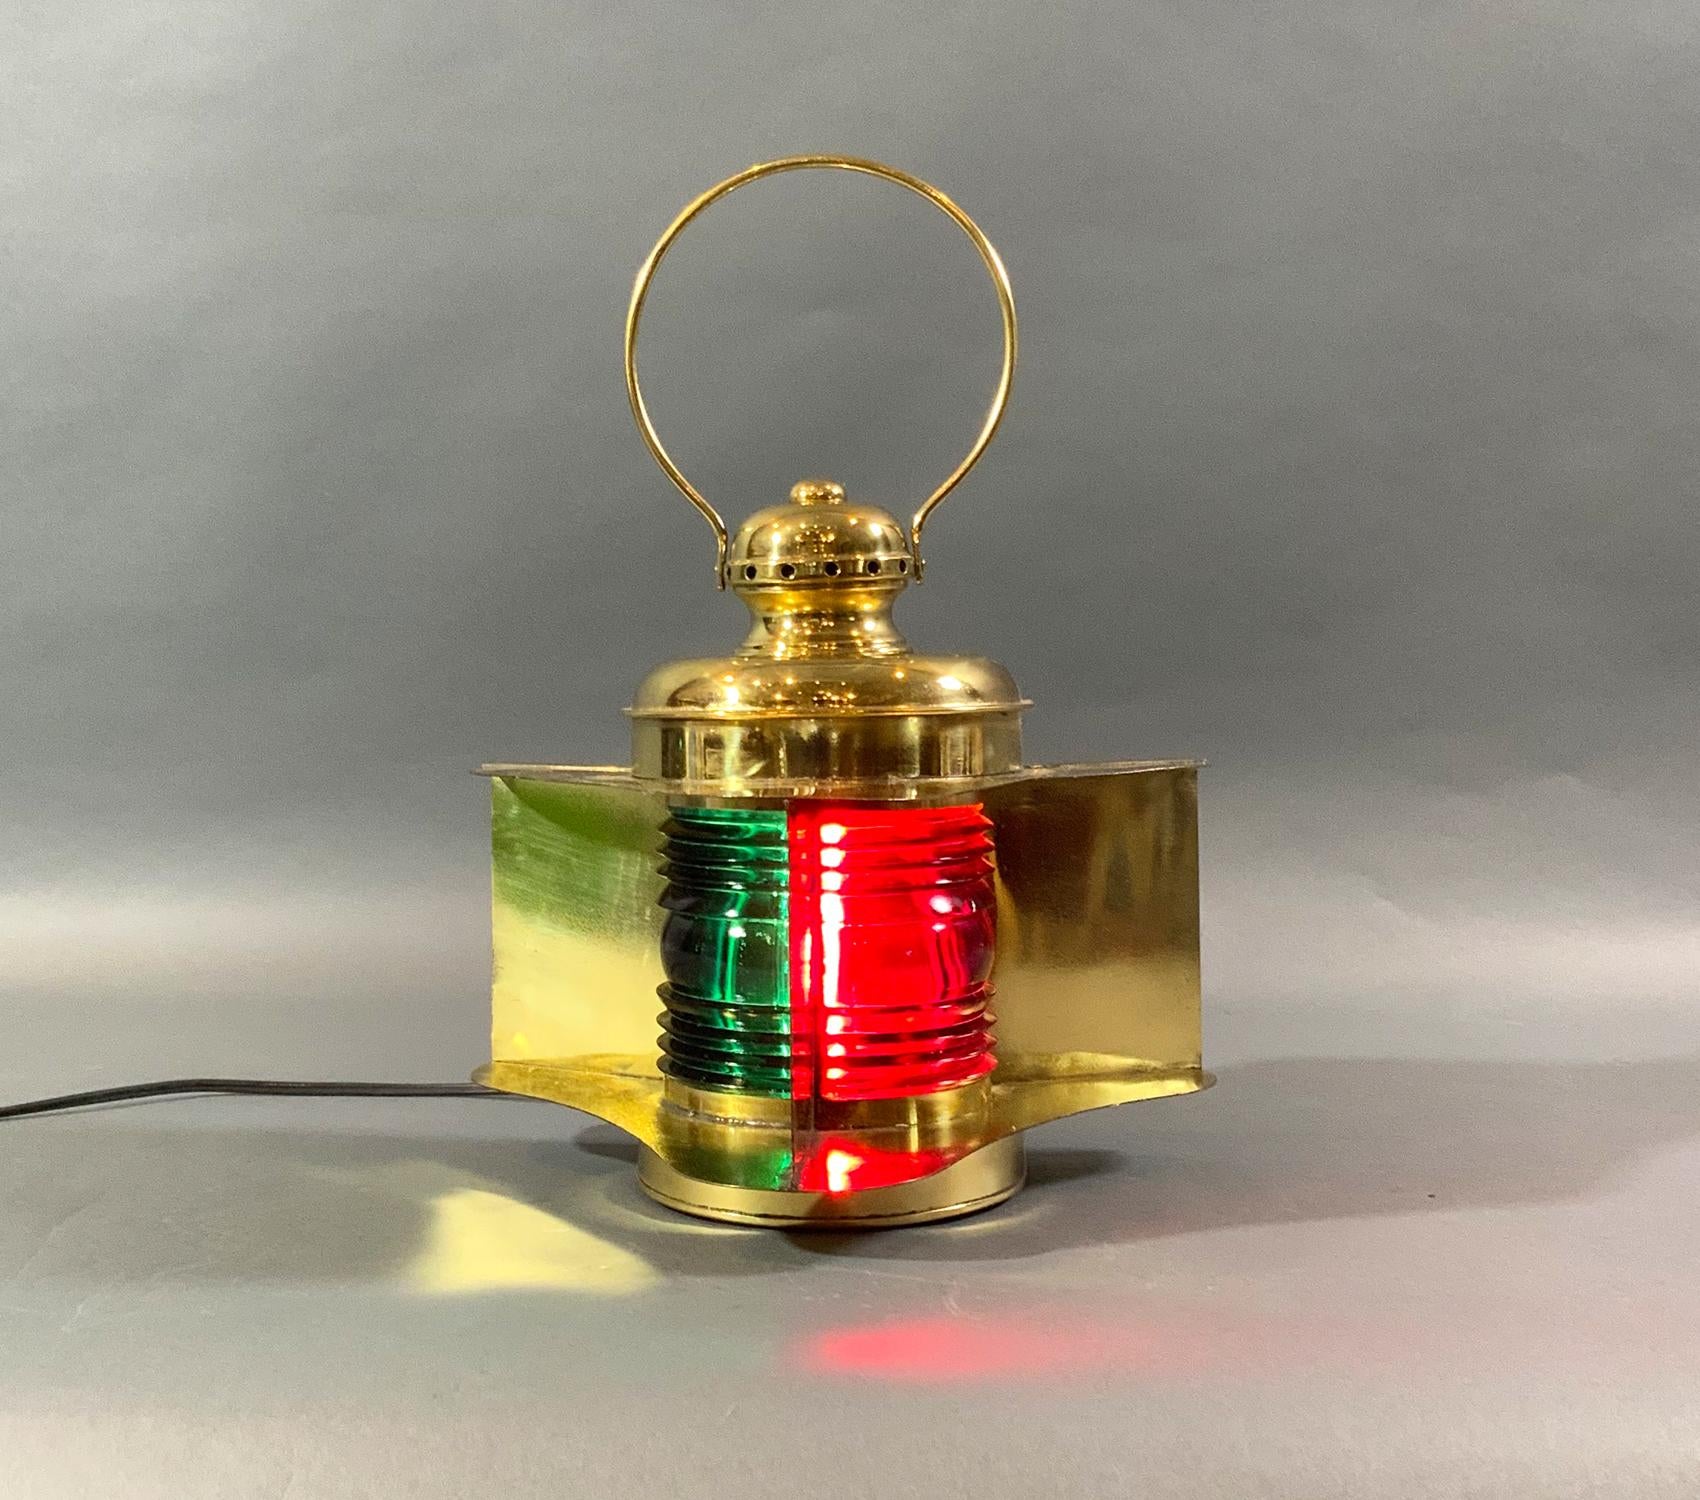 Ship’s port and starboard bow lantern with wide shroud and vane. Rich red and green Fresnel lenses. Manufacturer’s name is embossed on the hinged rear door, “MFRD” by Perkins Marine Lamp Corporation, Brooklyn, New York. This has been freshly